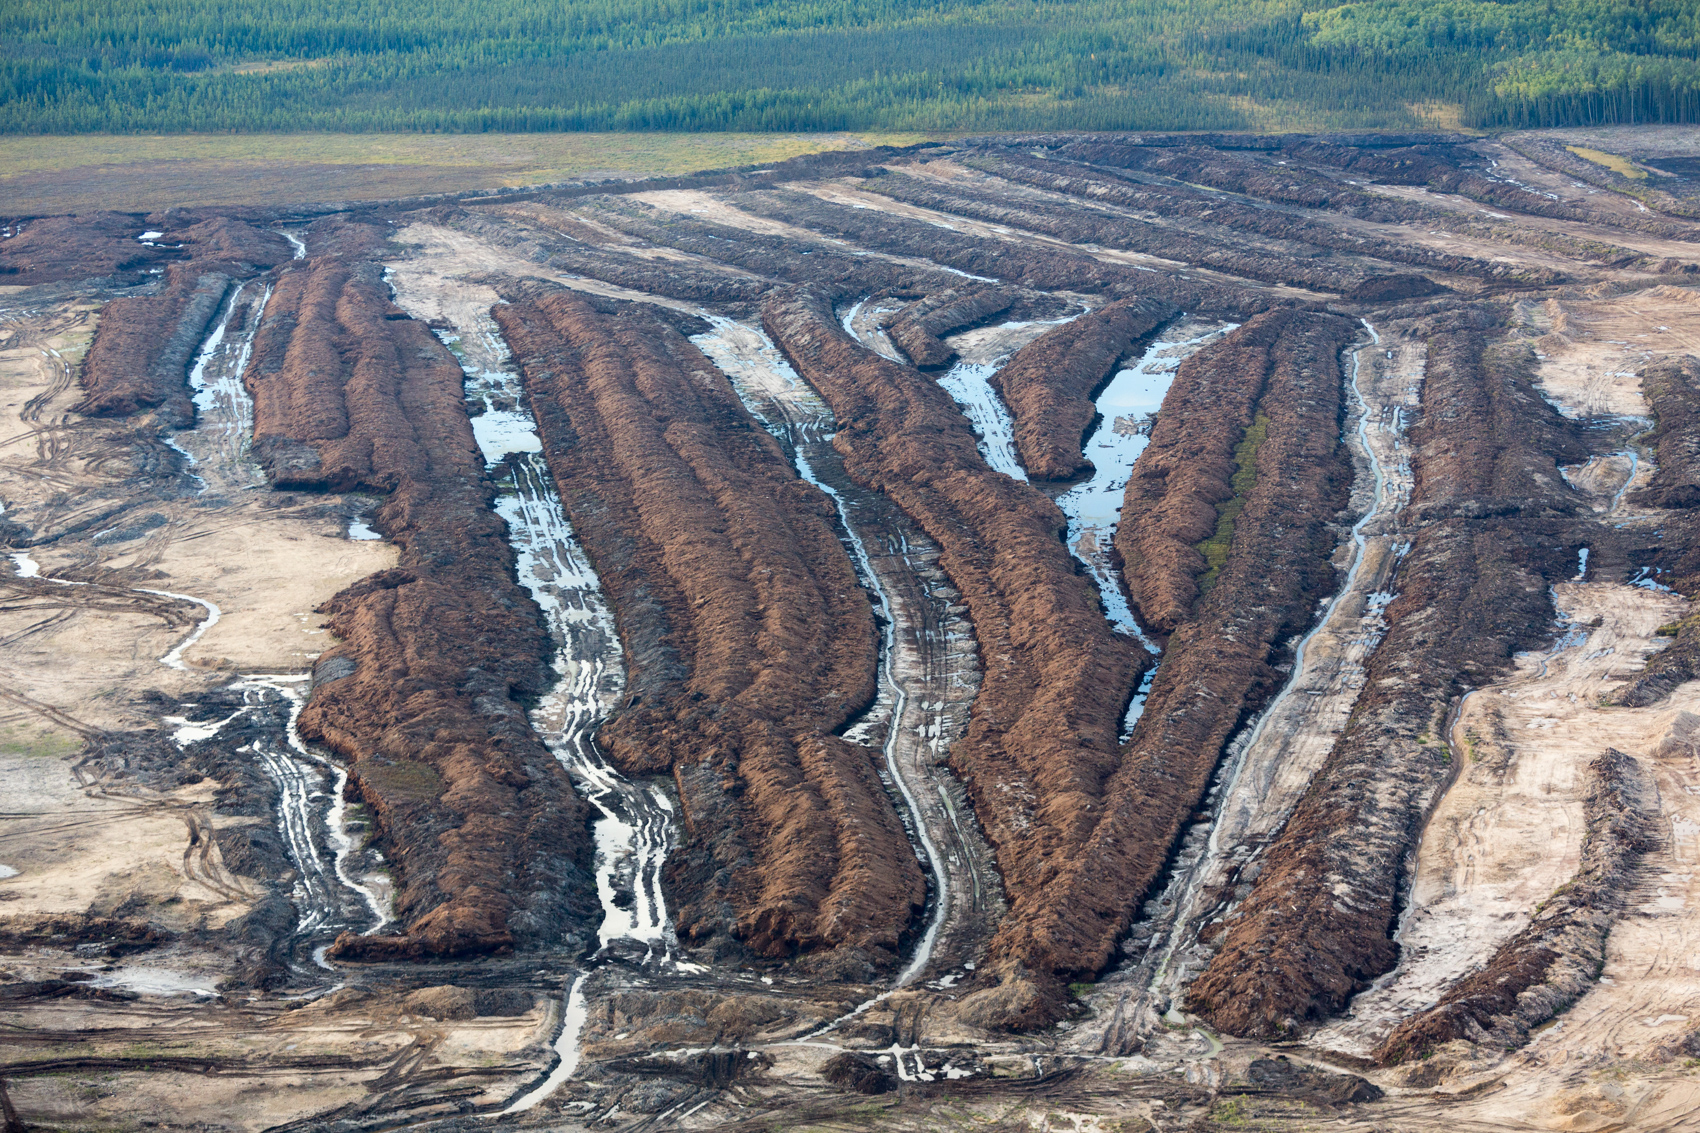 Muskeg, A Peat-Like, Moisture-Rich Soil, Must be Dewatered Before Open Pit Mining Can Begin, Alberta, Canada 2014